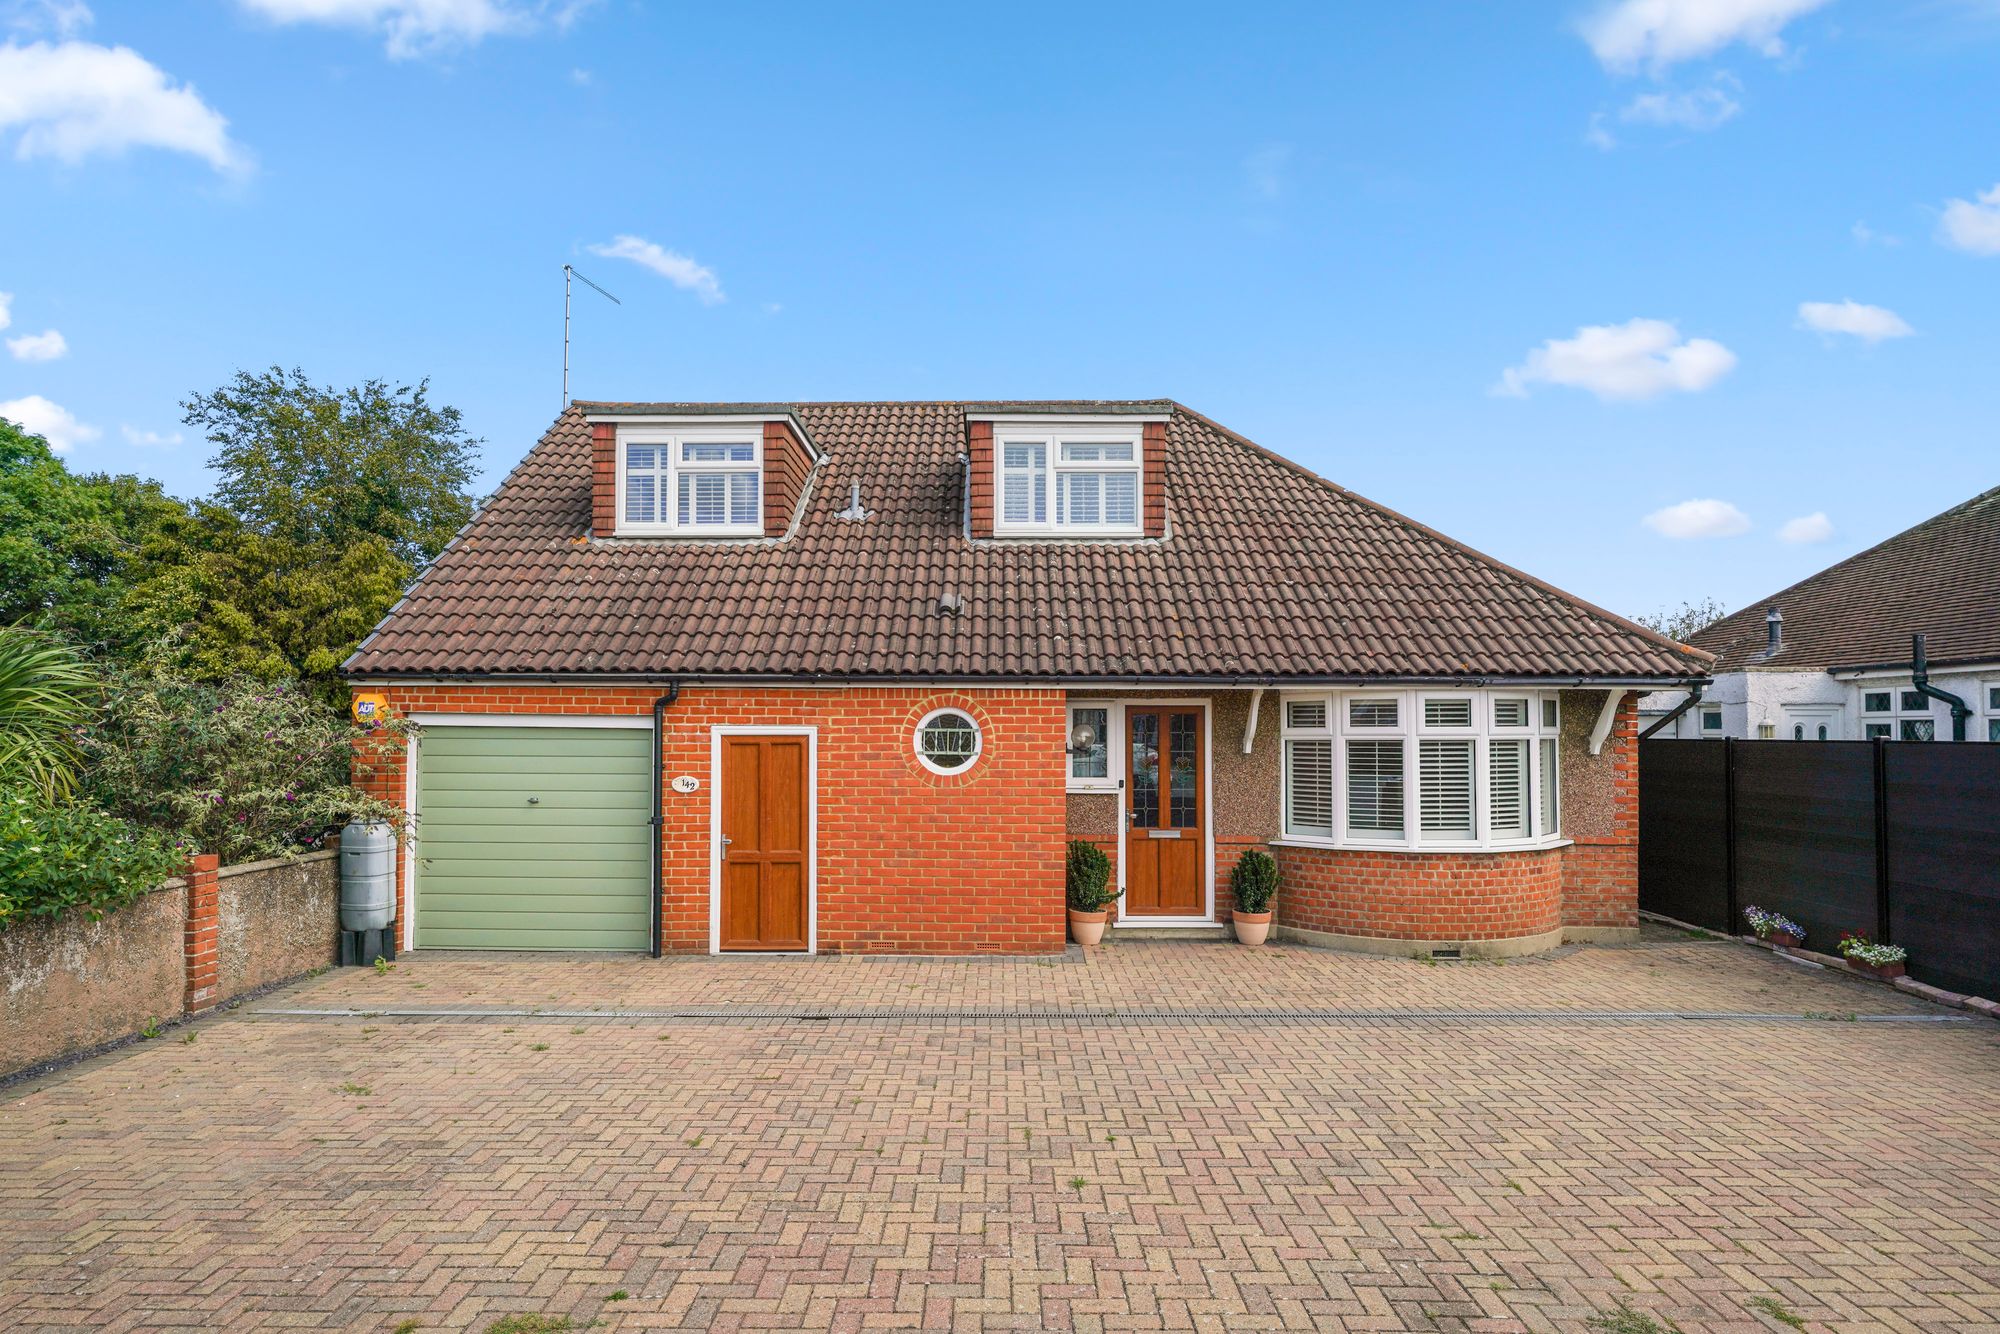 4 bed detached house for sale in Staines Road, Staines-Upon-Thames 0